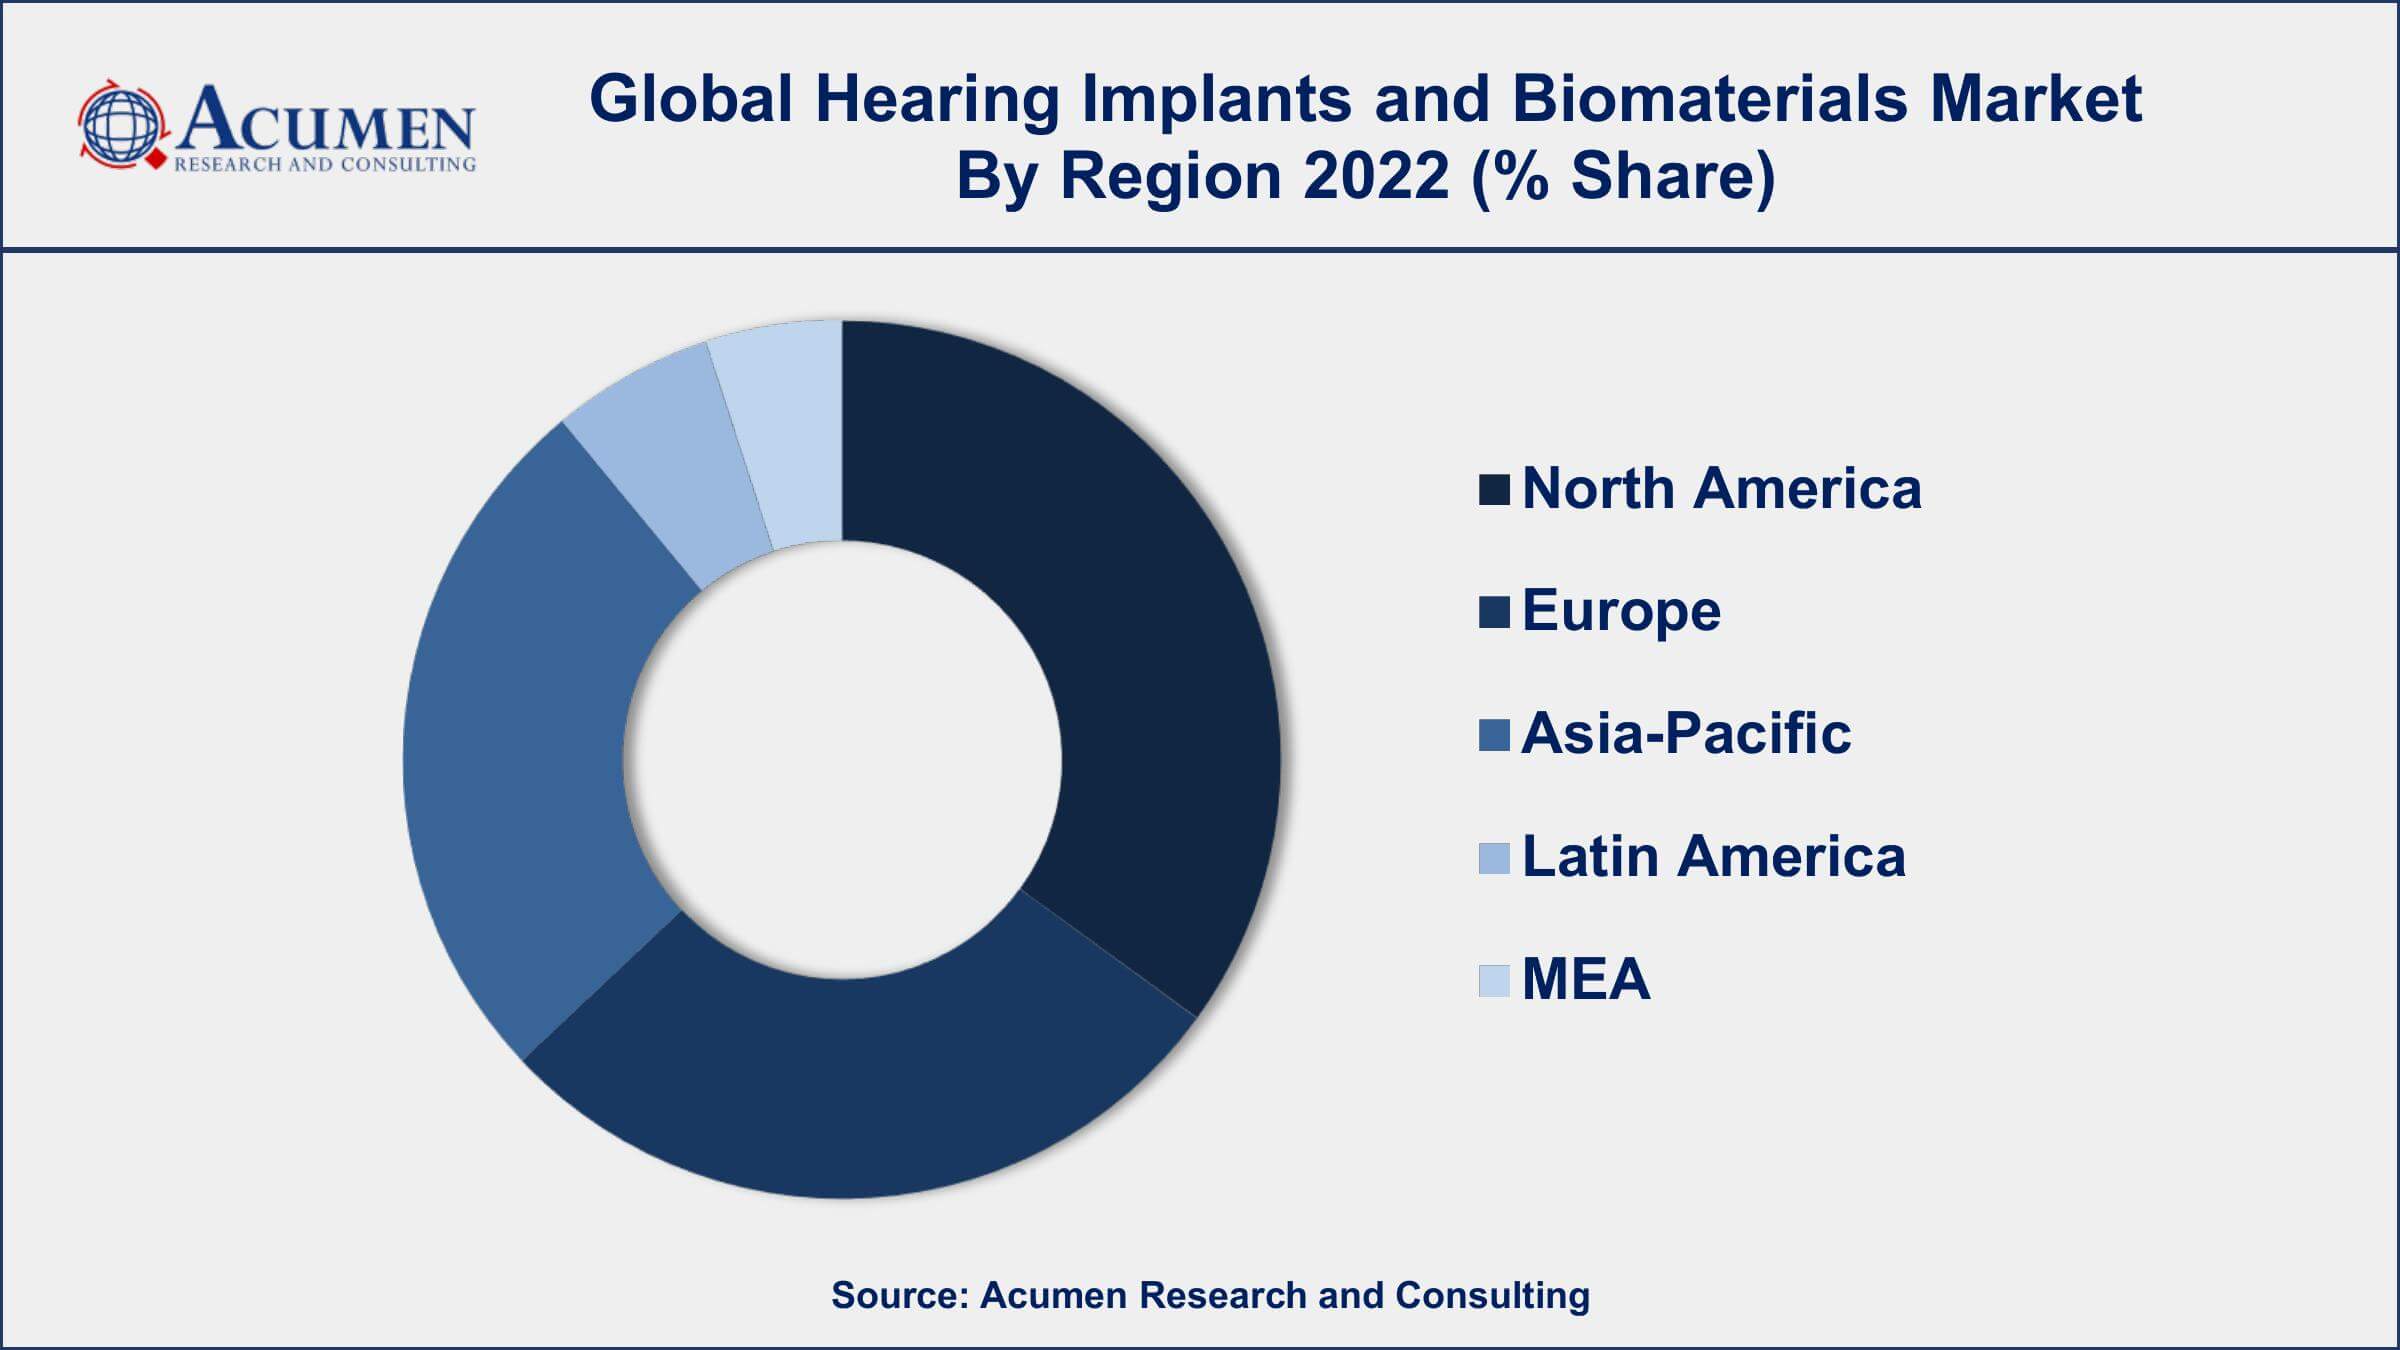 Hearing Implants and Biomaterials Market Drivers